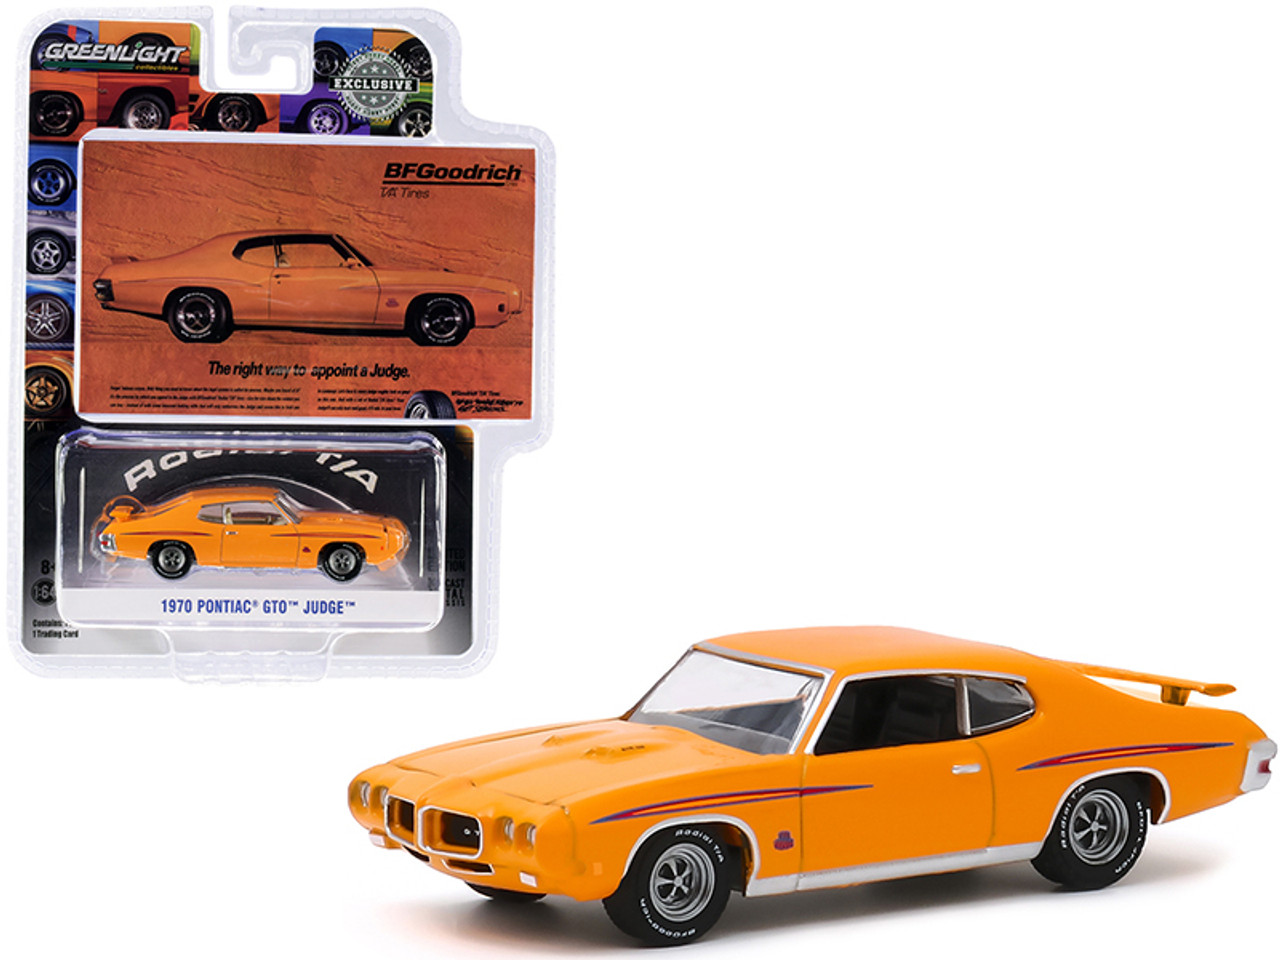 1970 Pontiac GTO Judge Orange "The Right Way To Appoint A Judge" BFGoodrich Vintage Ad Cars "Hobby Exclusive" 1/64 Diecast Model Car by Greenlight